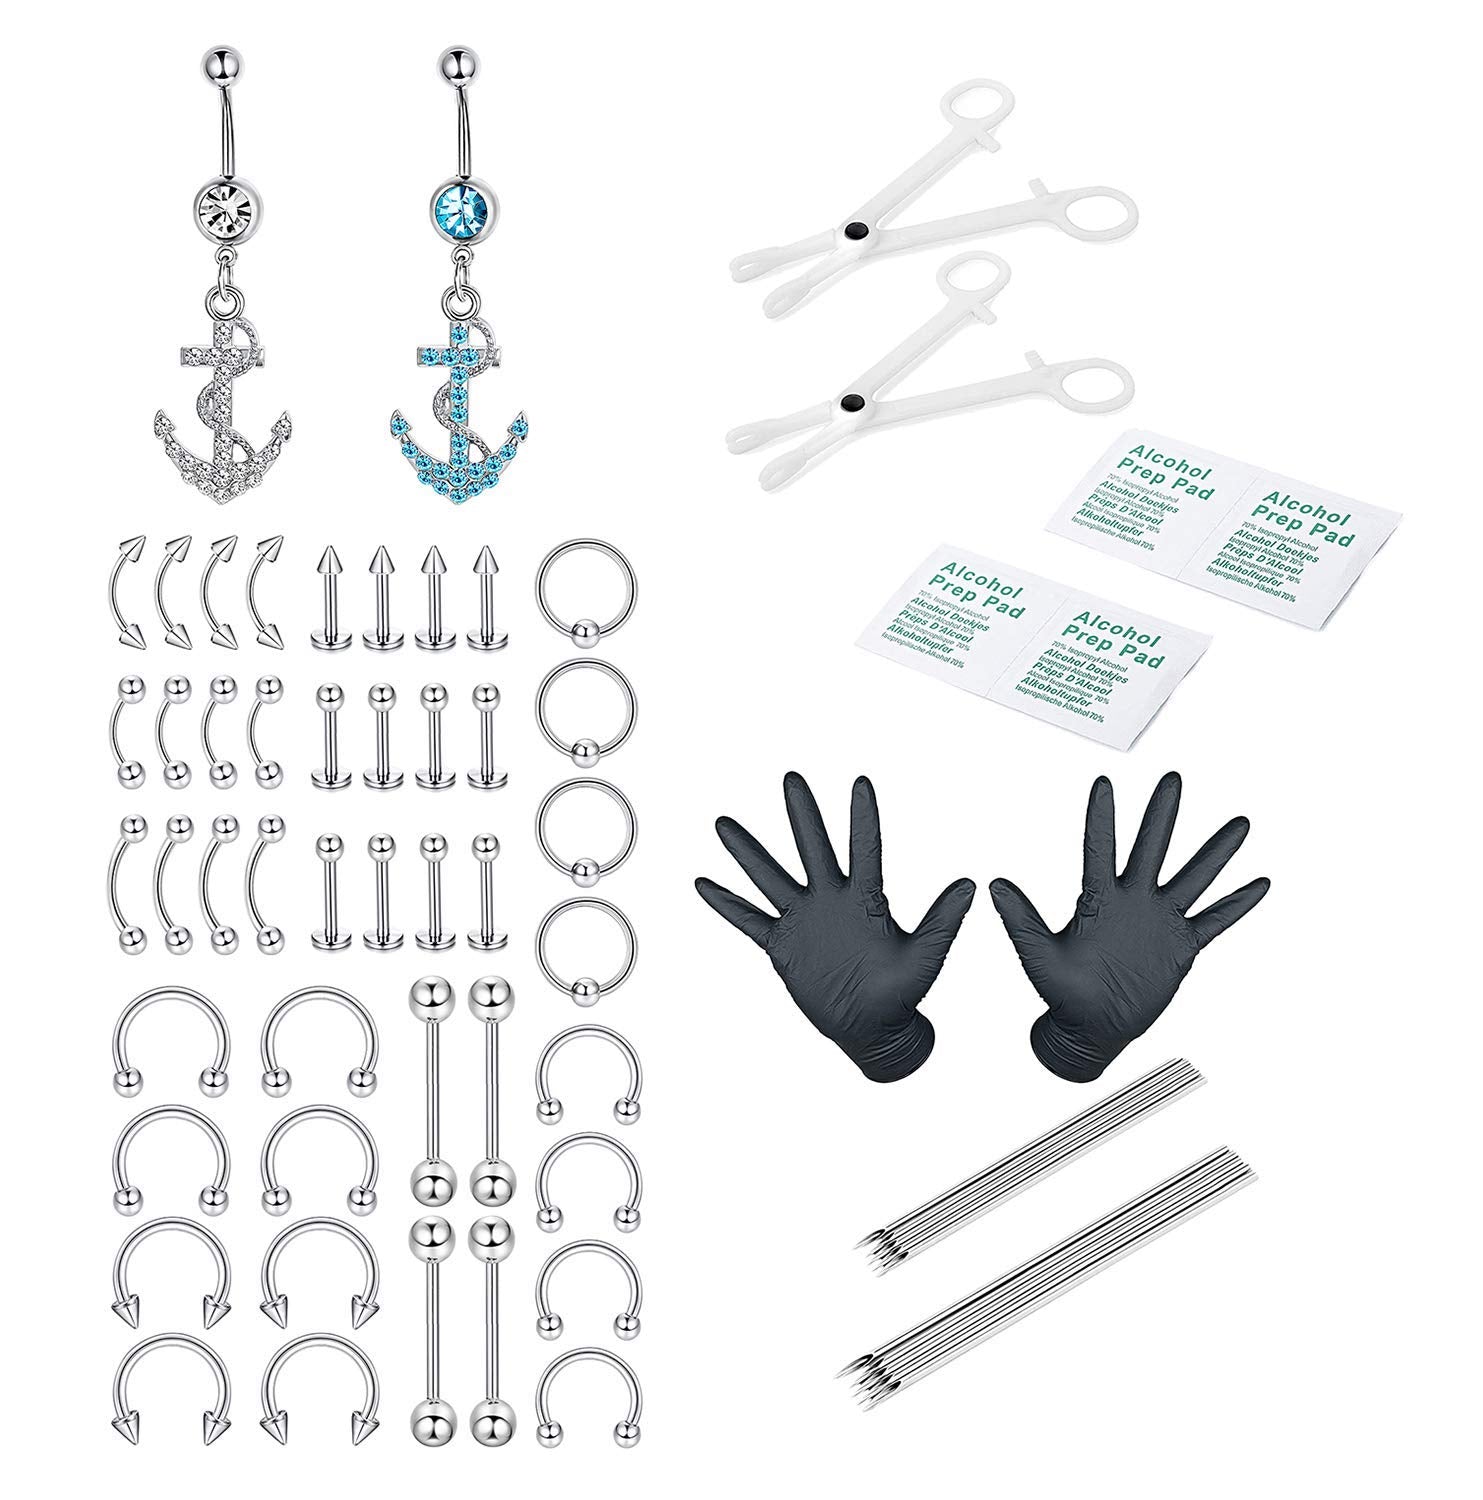 ADRAMATA 64Pcs 14G 16G Professional Piercing Kit Stainless Steel Belly Rings Lip Nose All Body Piercings Kits Jewellry